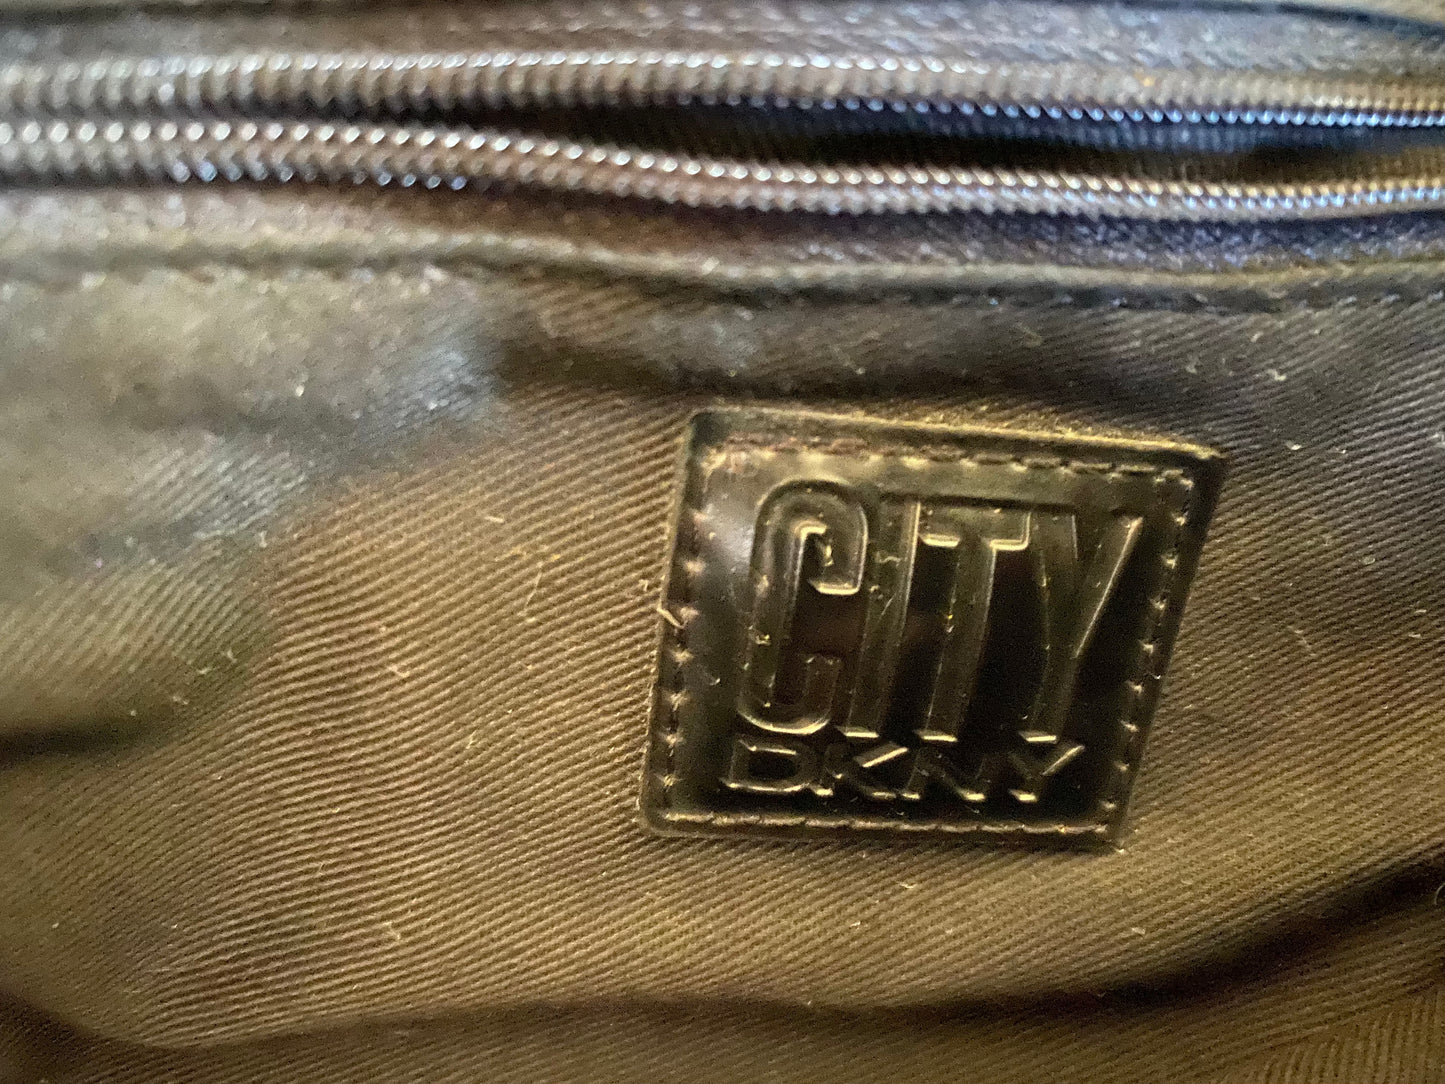 CITY DKNY Small Black Nylon Shoulder Bag. Style Is Right On Trend.